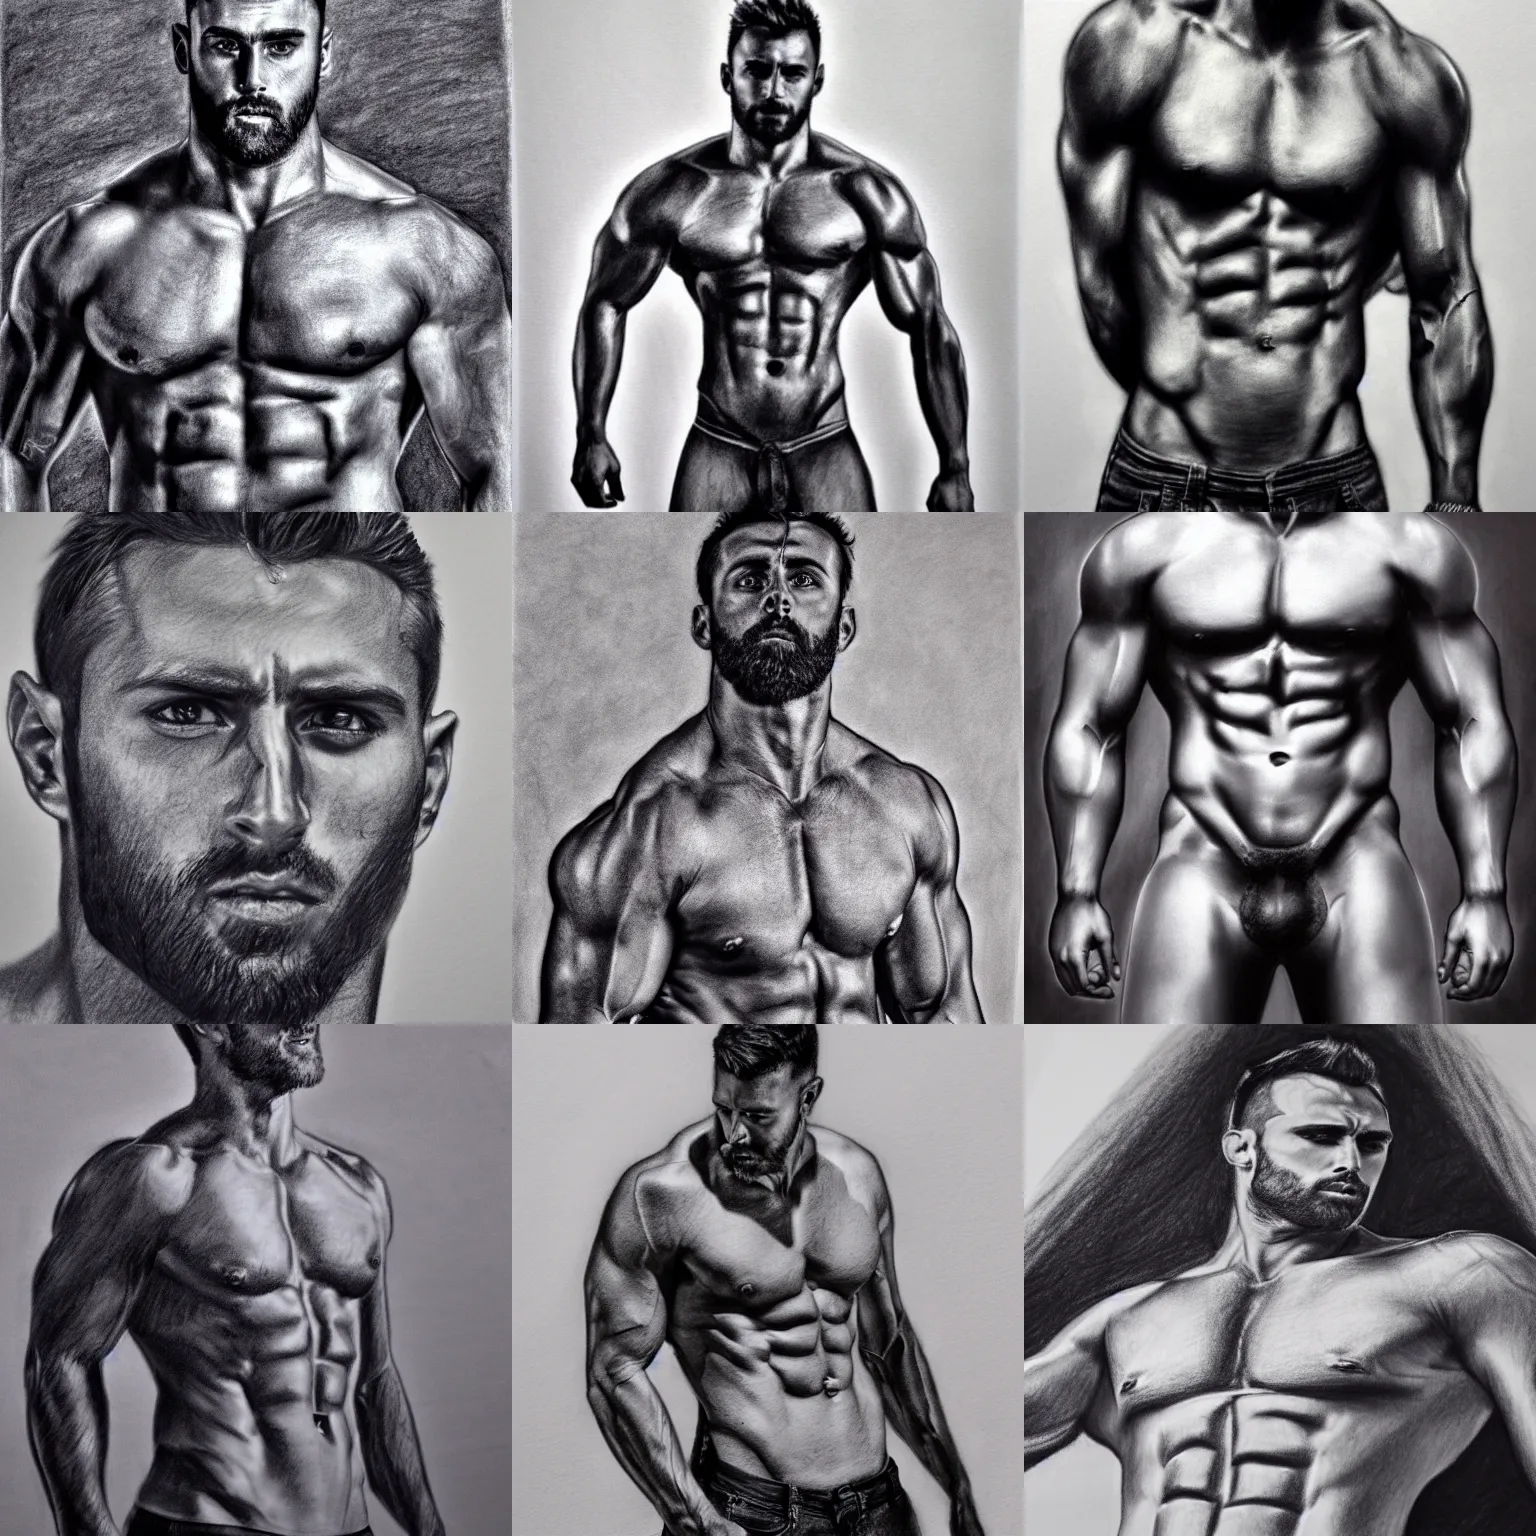 Muscular Guy with Six-Pack – The Art of Douglas Simonson